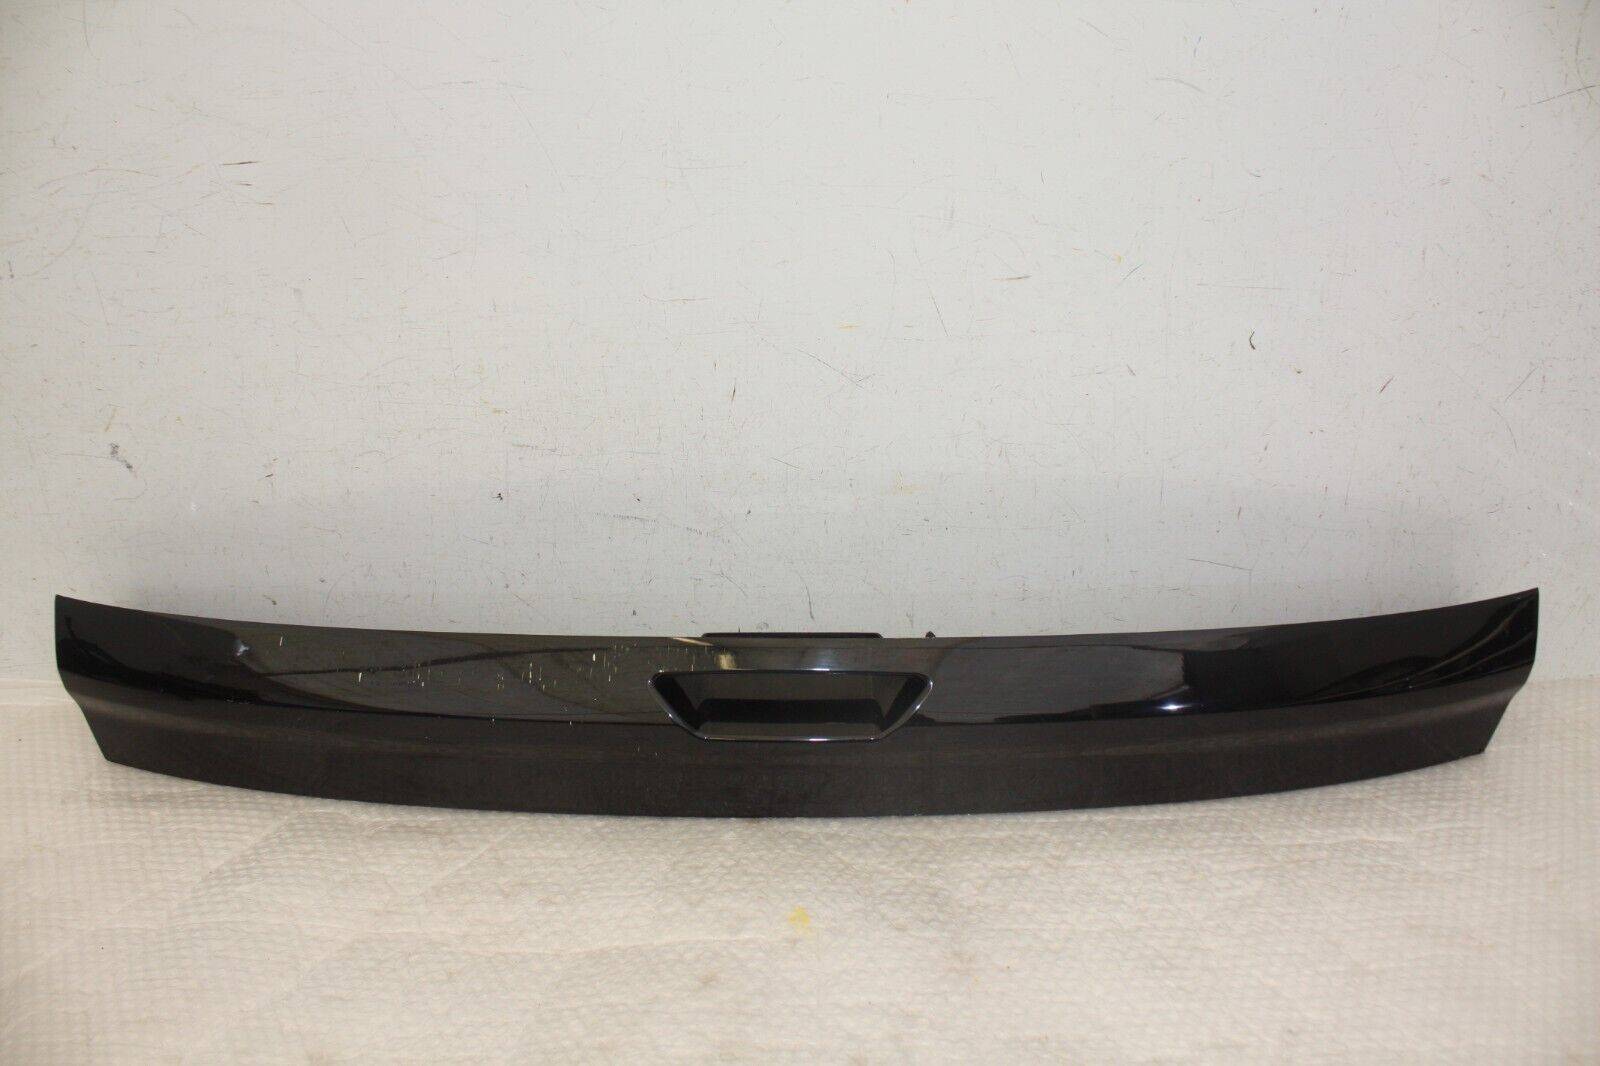 Ford-Kuga-Rear-Tailgate-Boot-Cover-Lower-Section-CJ54-S423A40-Genuine-176362627805